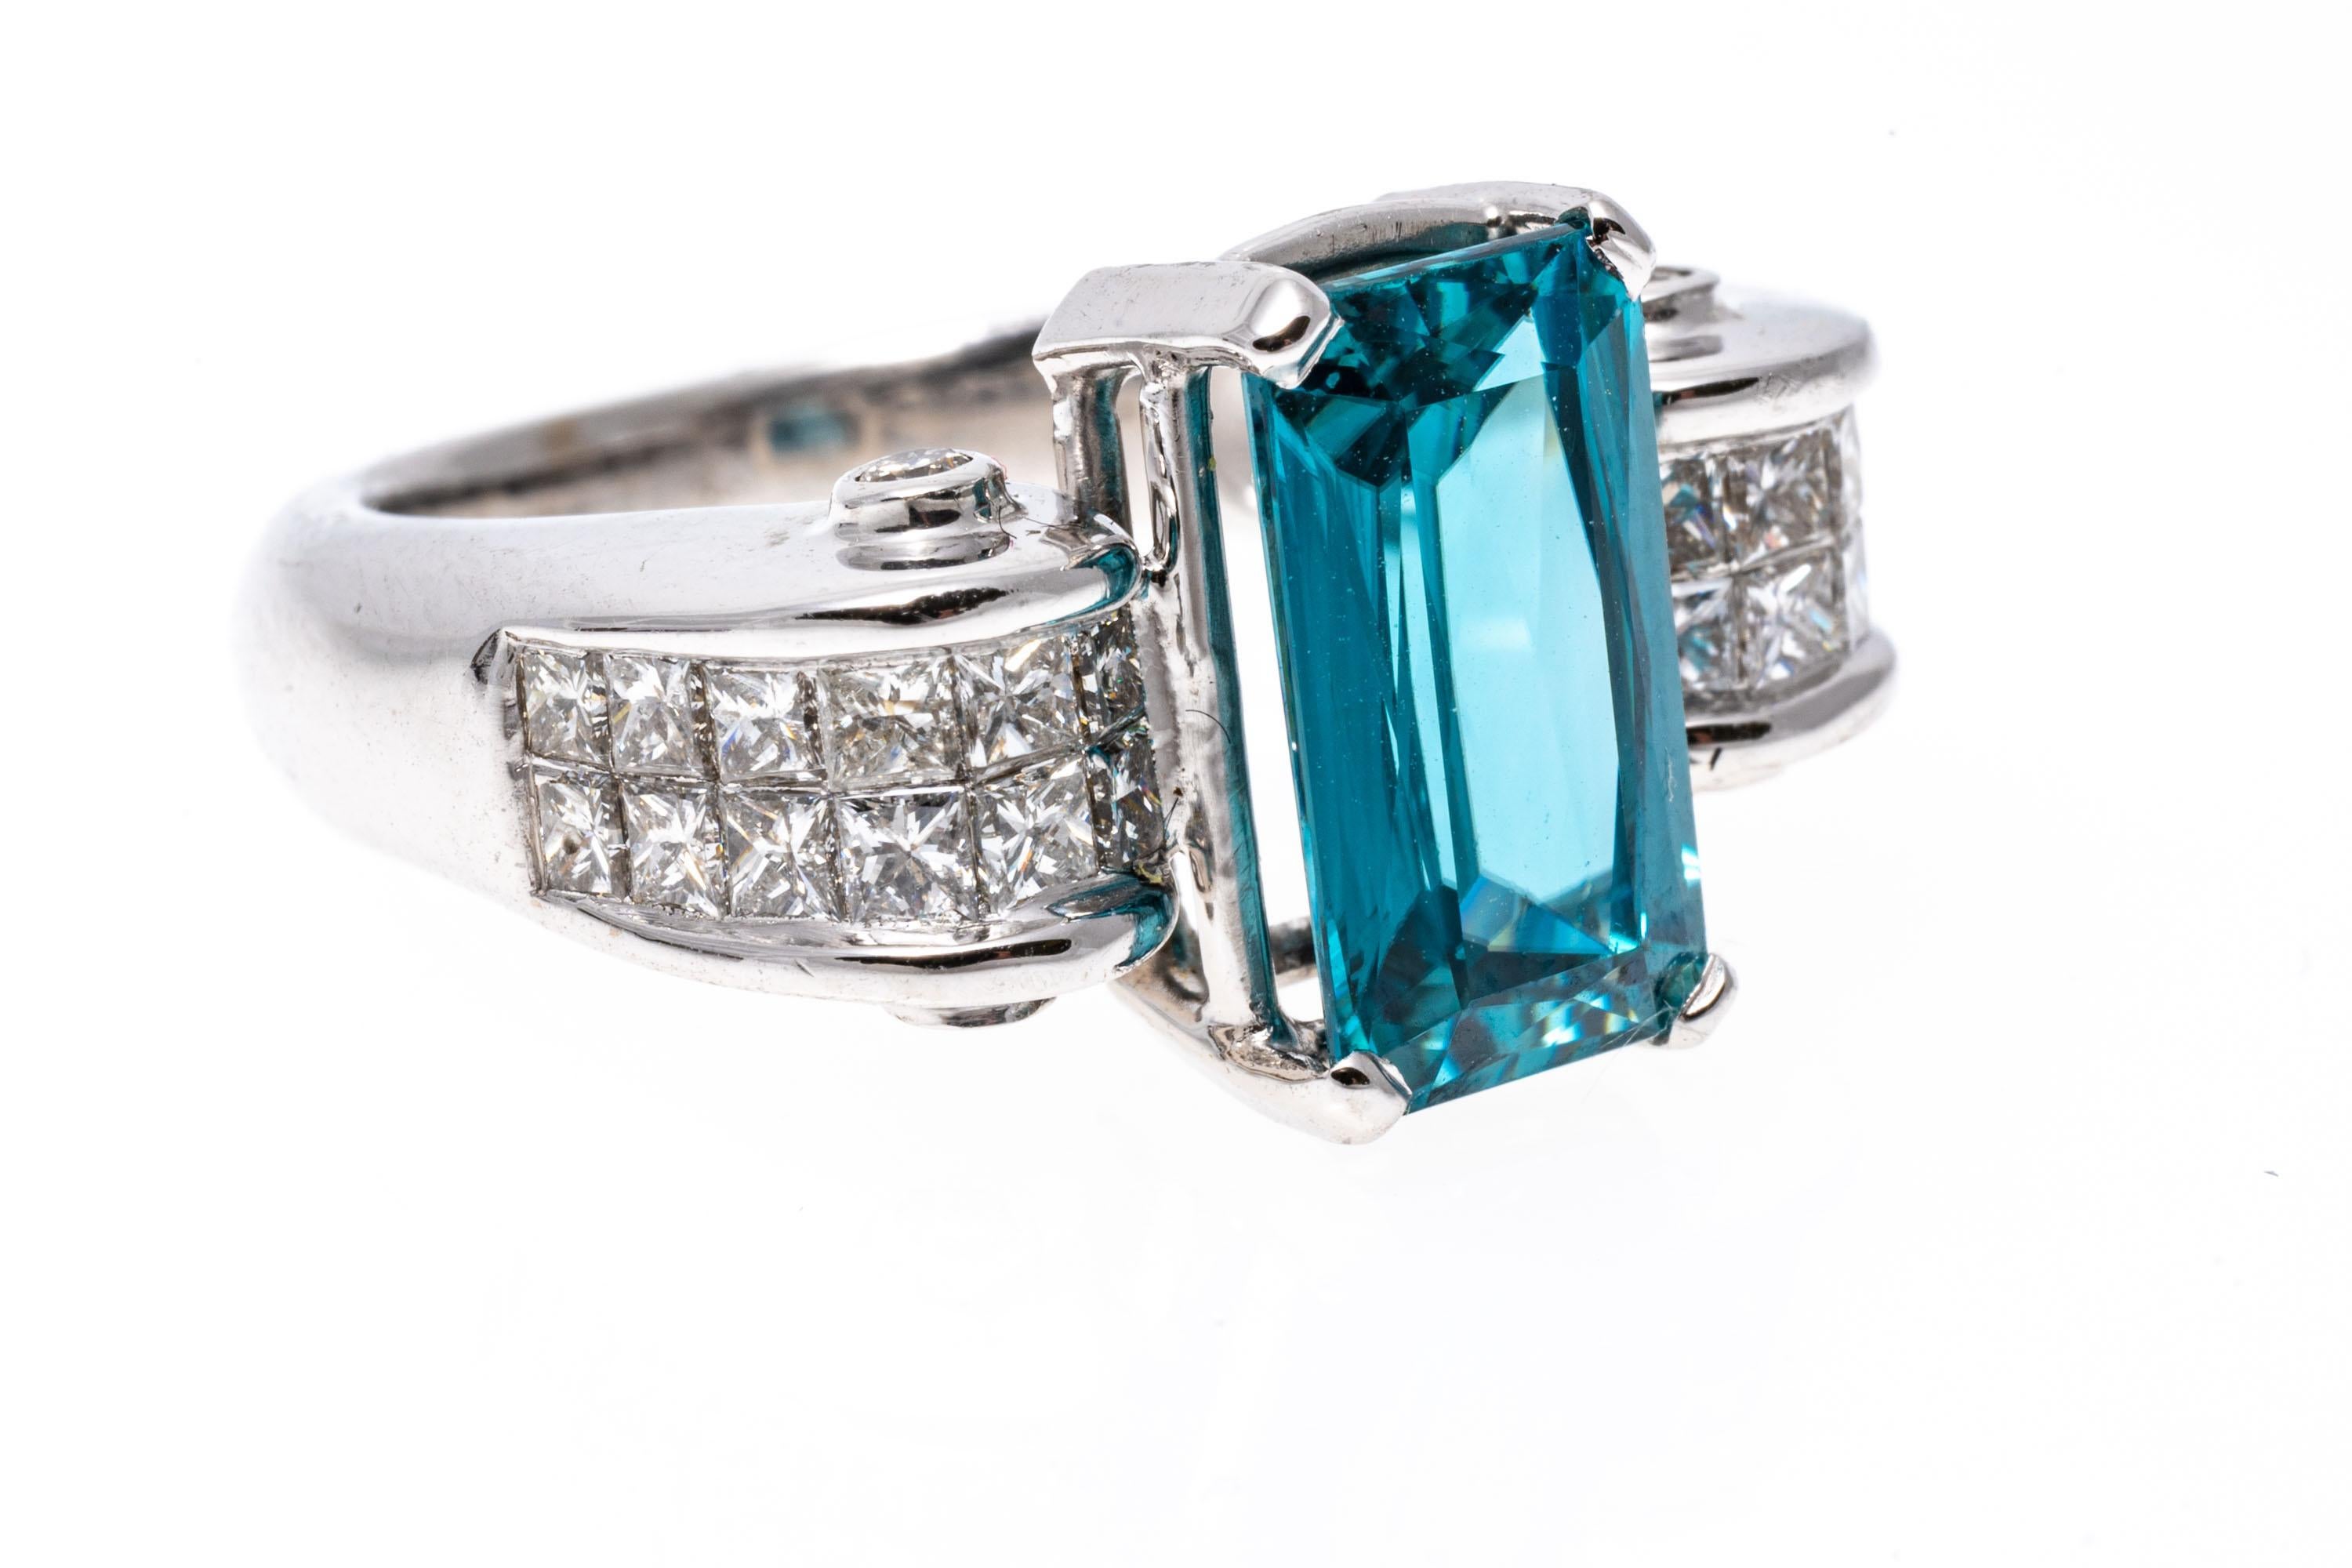 Contemporary 14k White Gold Scrolled Calibre Princess Cut Diamond And Blue Topaz Ring For Sale